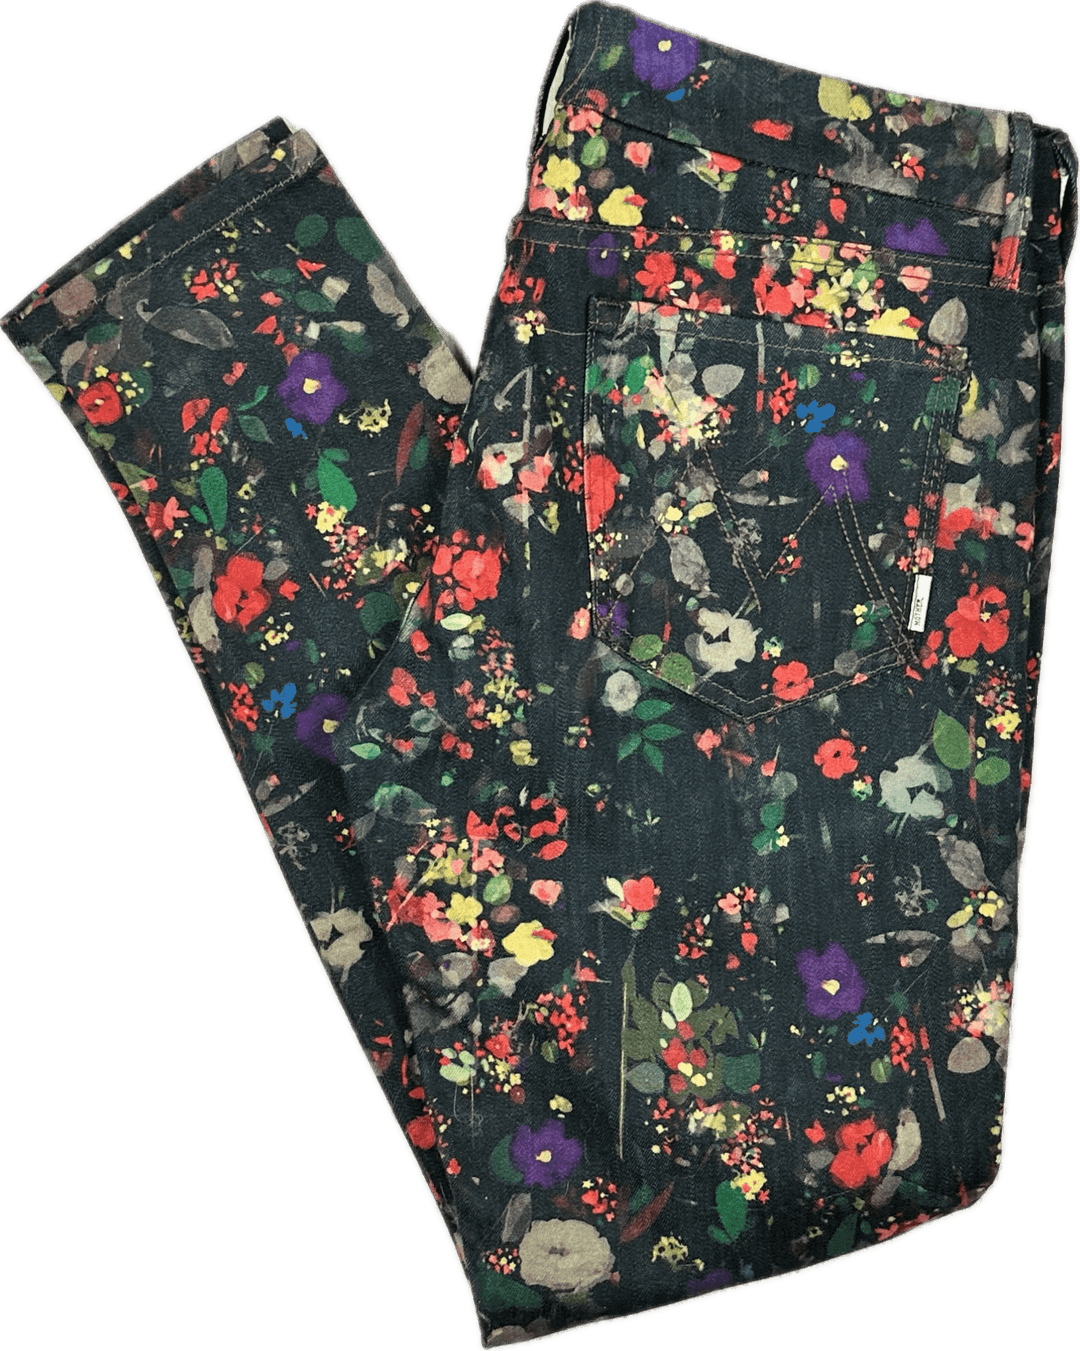 Mother 'The Looker' The Magical Forest Print Jeans - Size 31 - Jean Pool